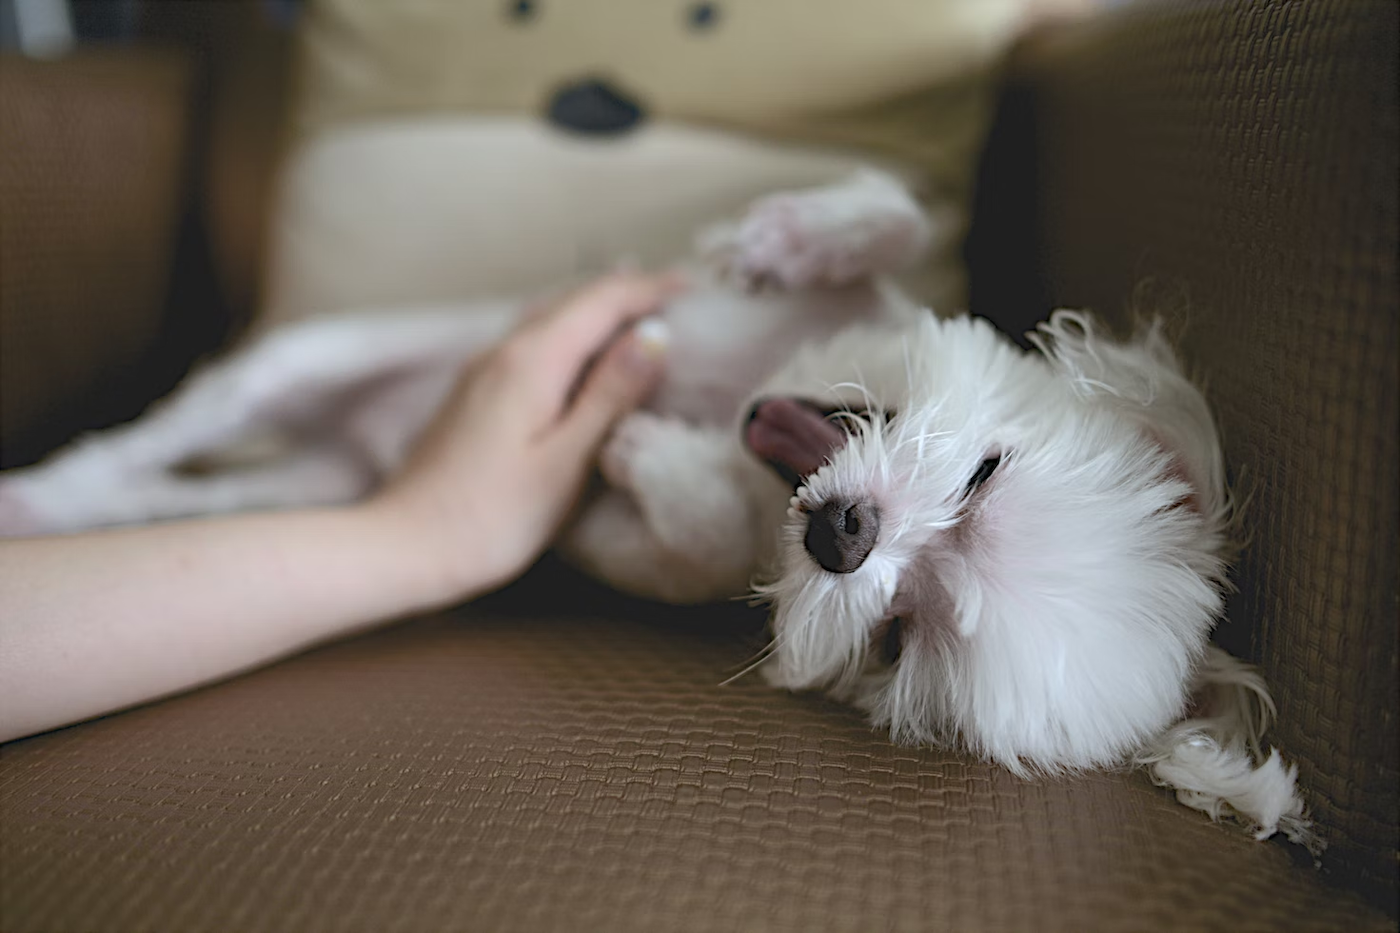 Lifestyle Tips: How to Take Proper Care of a Terminally Ill Pet